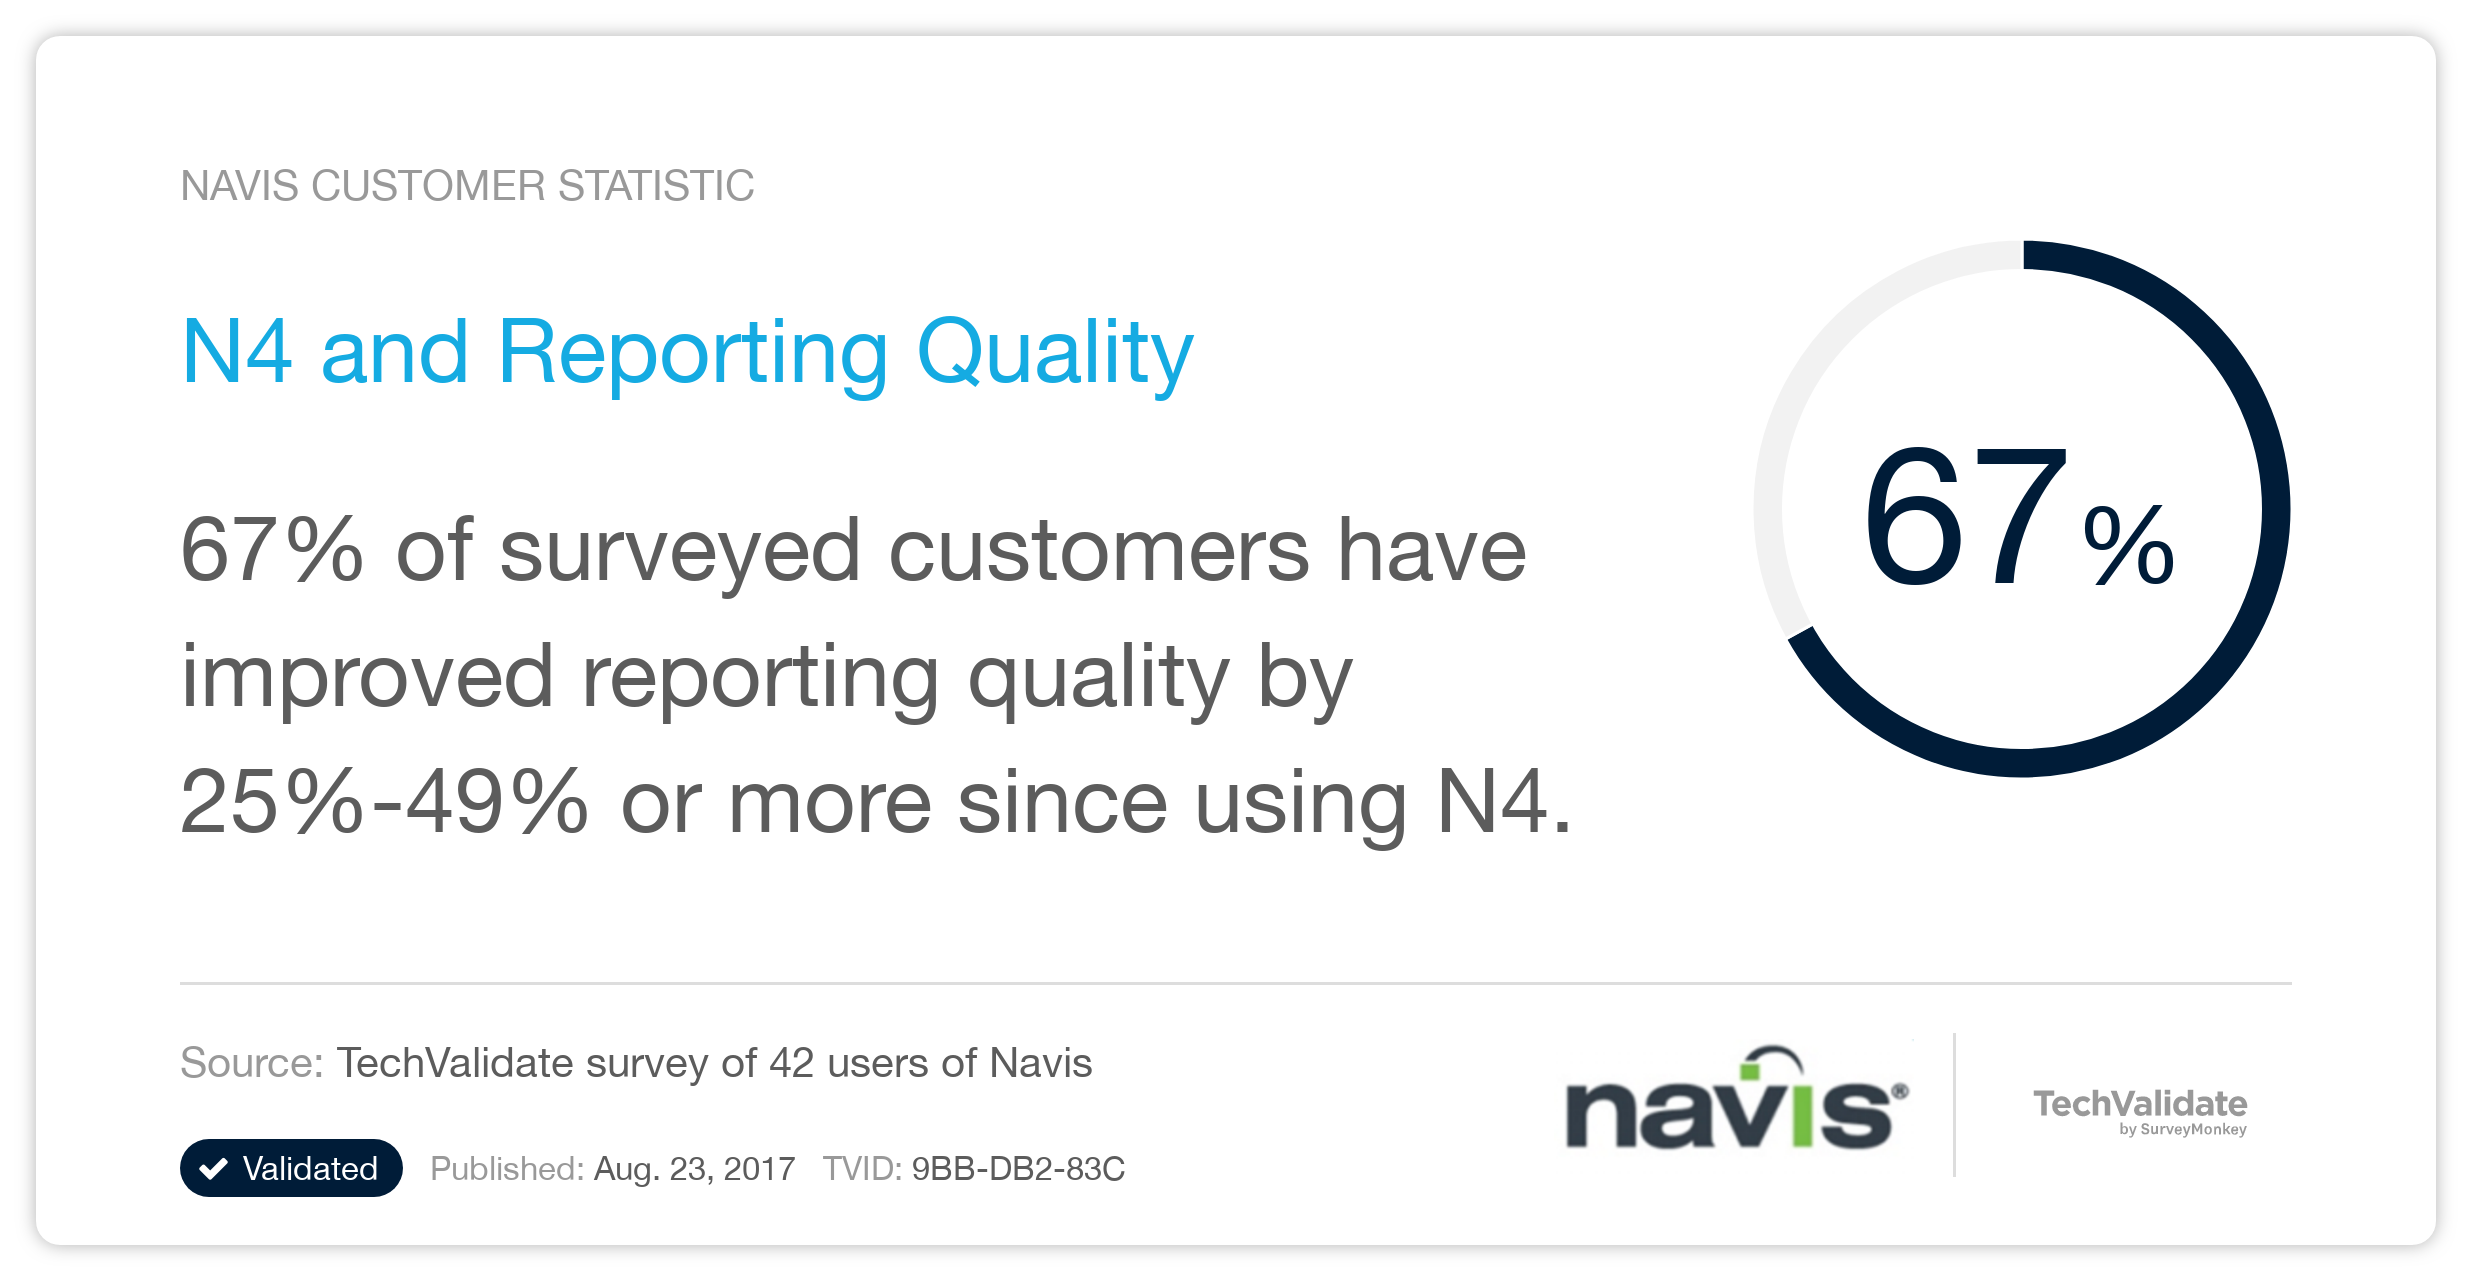 N4 and Reporting Quality